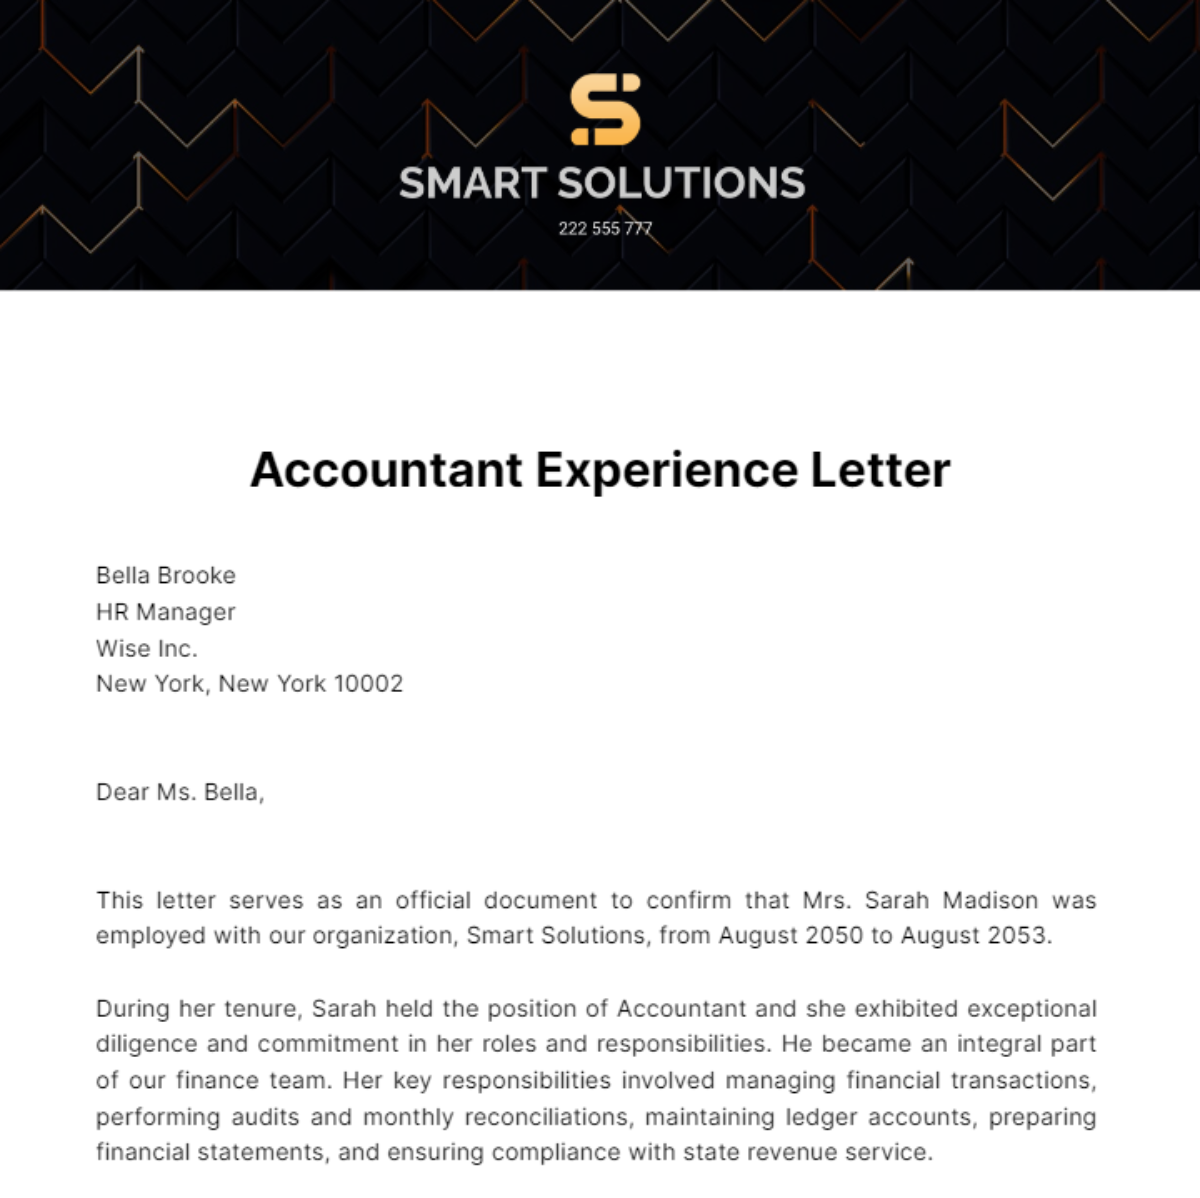 Accountant Experience Letter Template